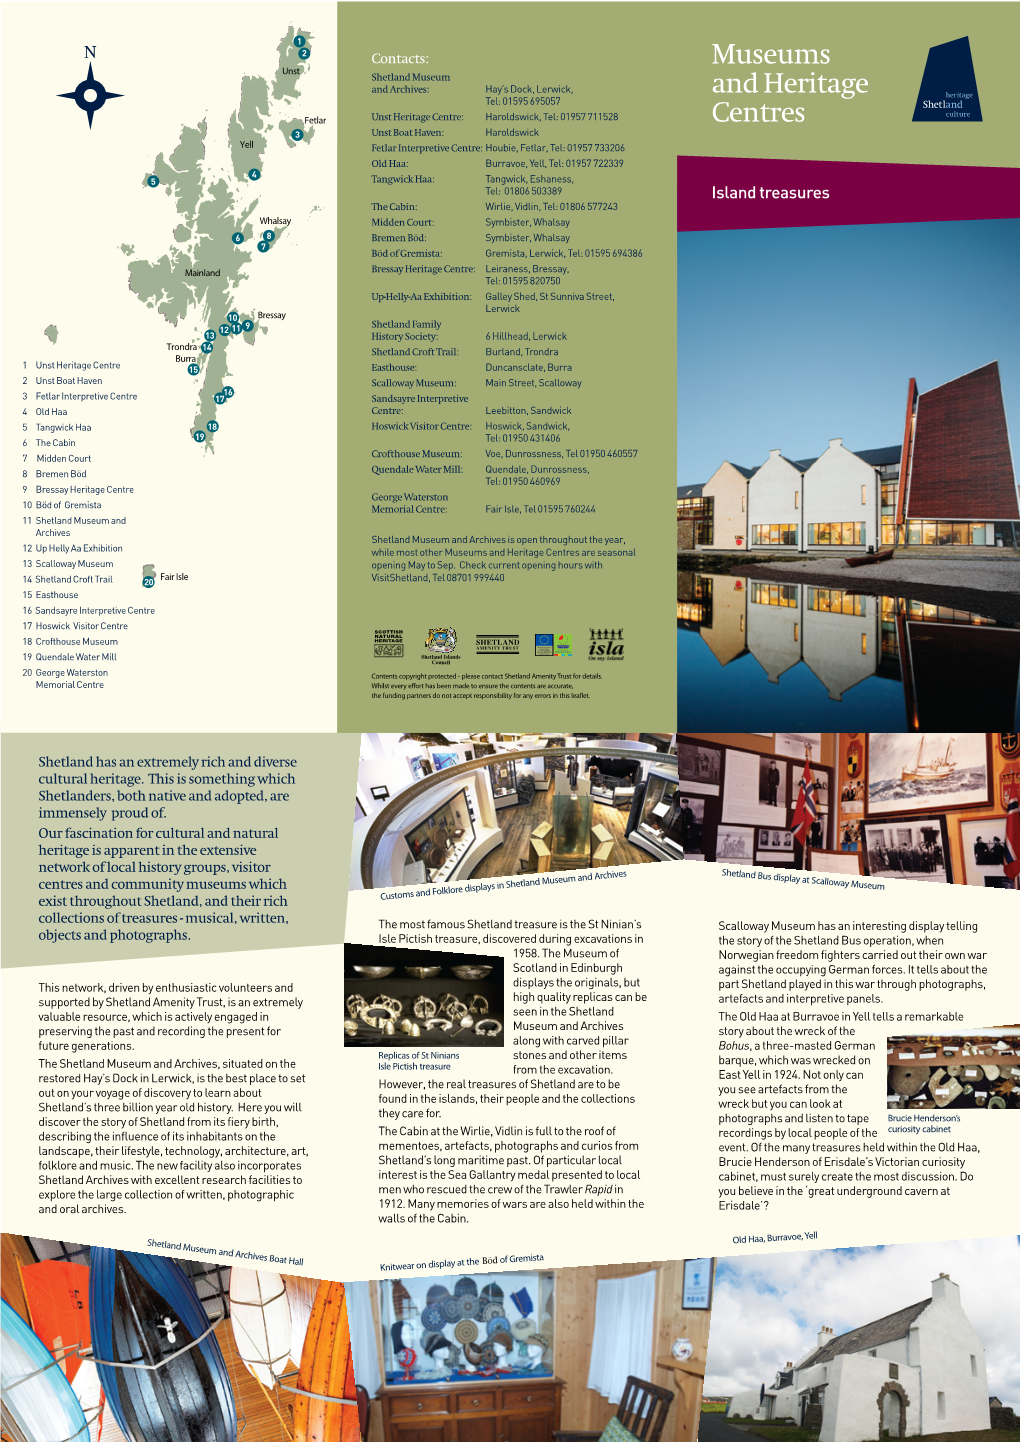 Museums and Heritage Centres Are Seasonal 13 Scalloway Museum Opening May to Sep